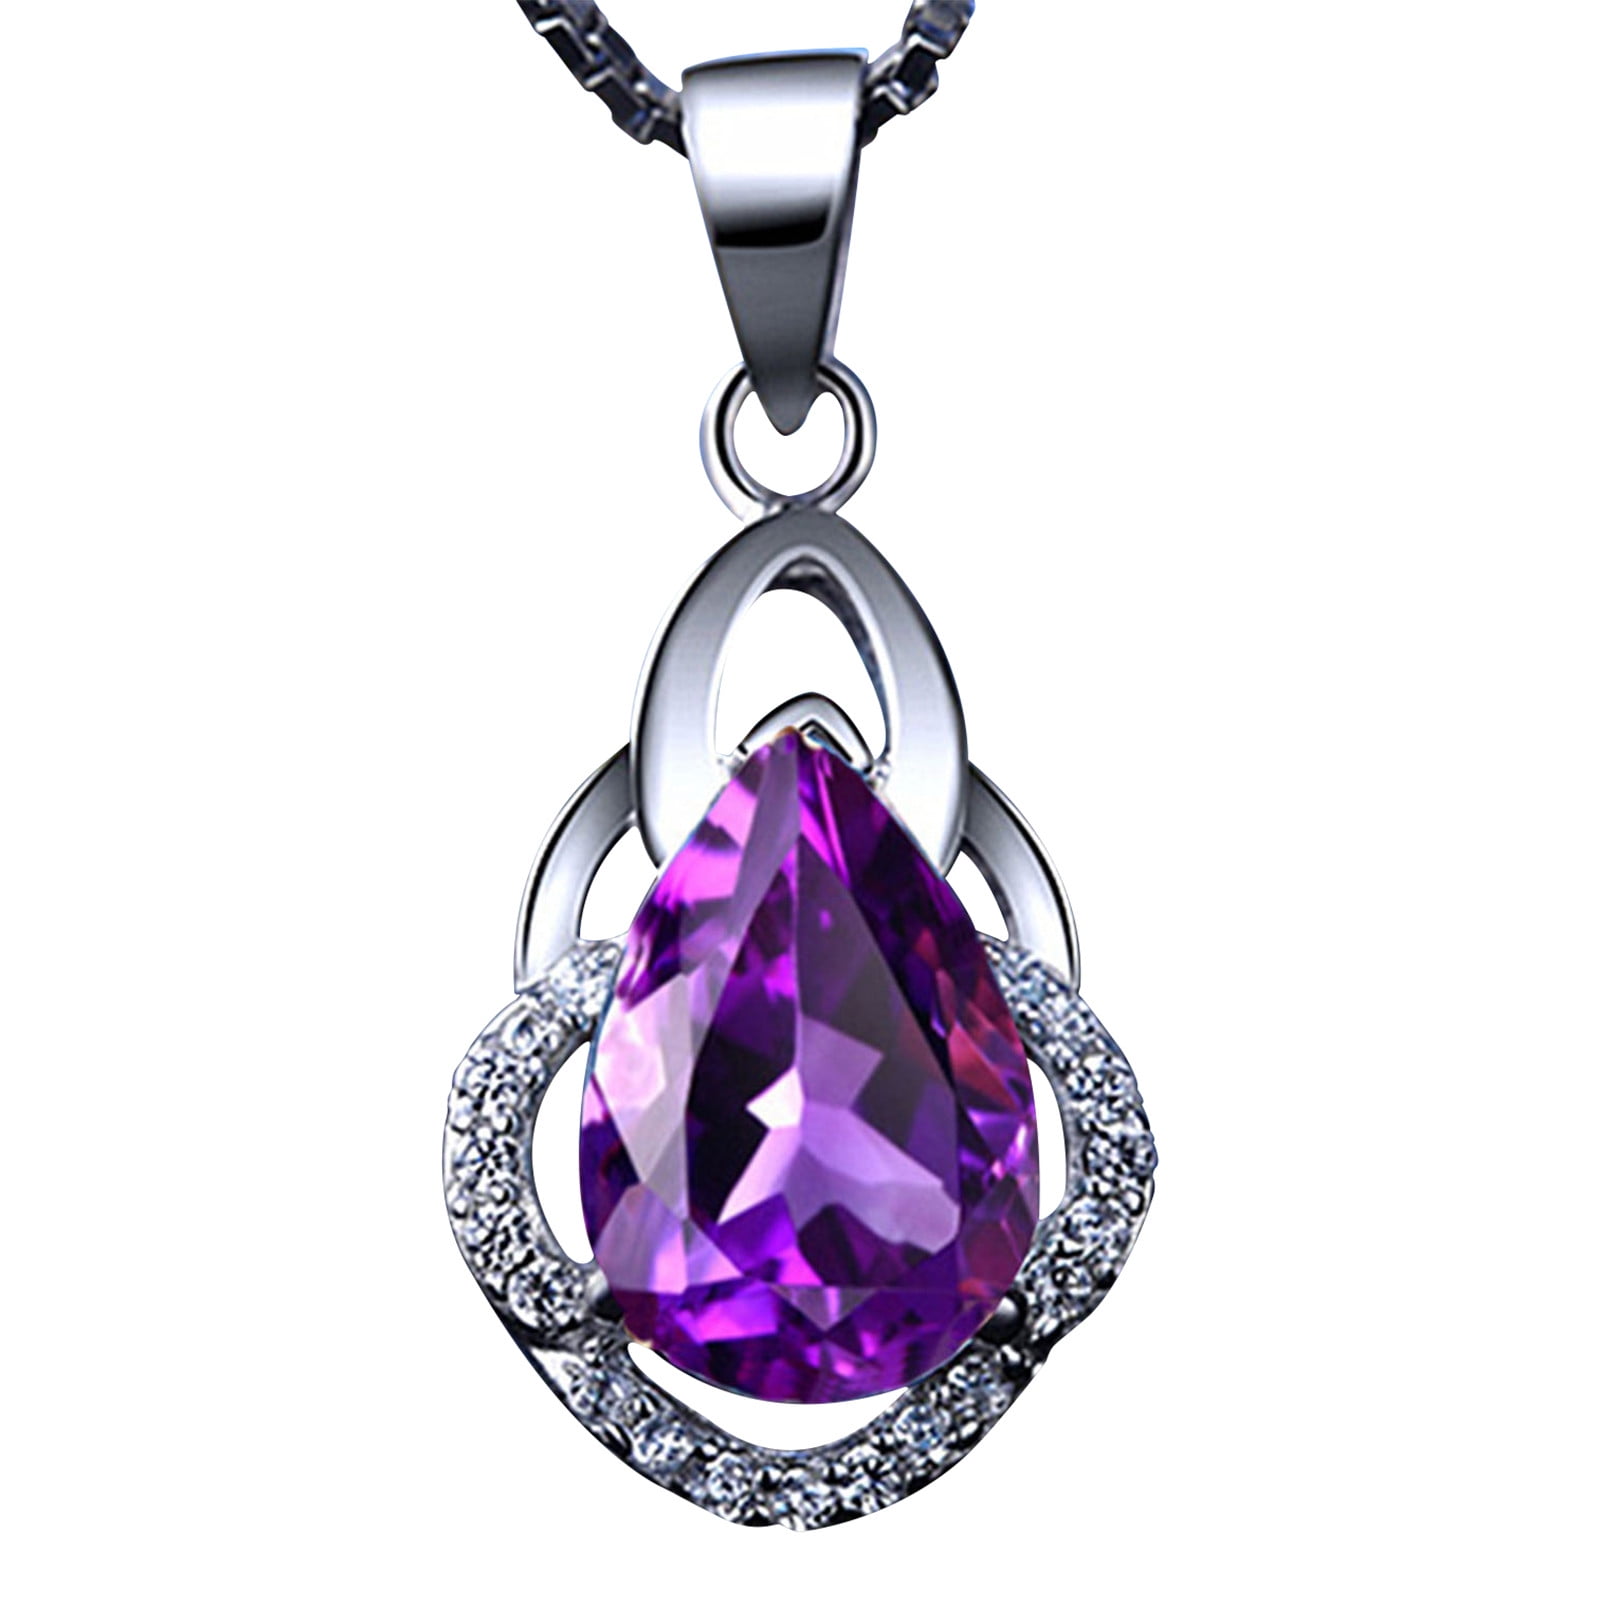 Details about   Amethyst Flower 925 Sterling Silver Necklace Corona Sun Jewelry